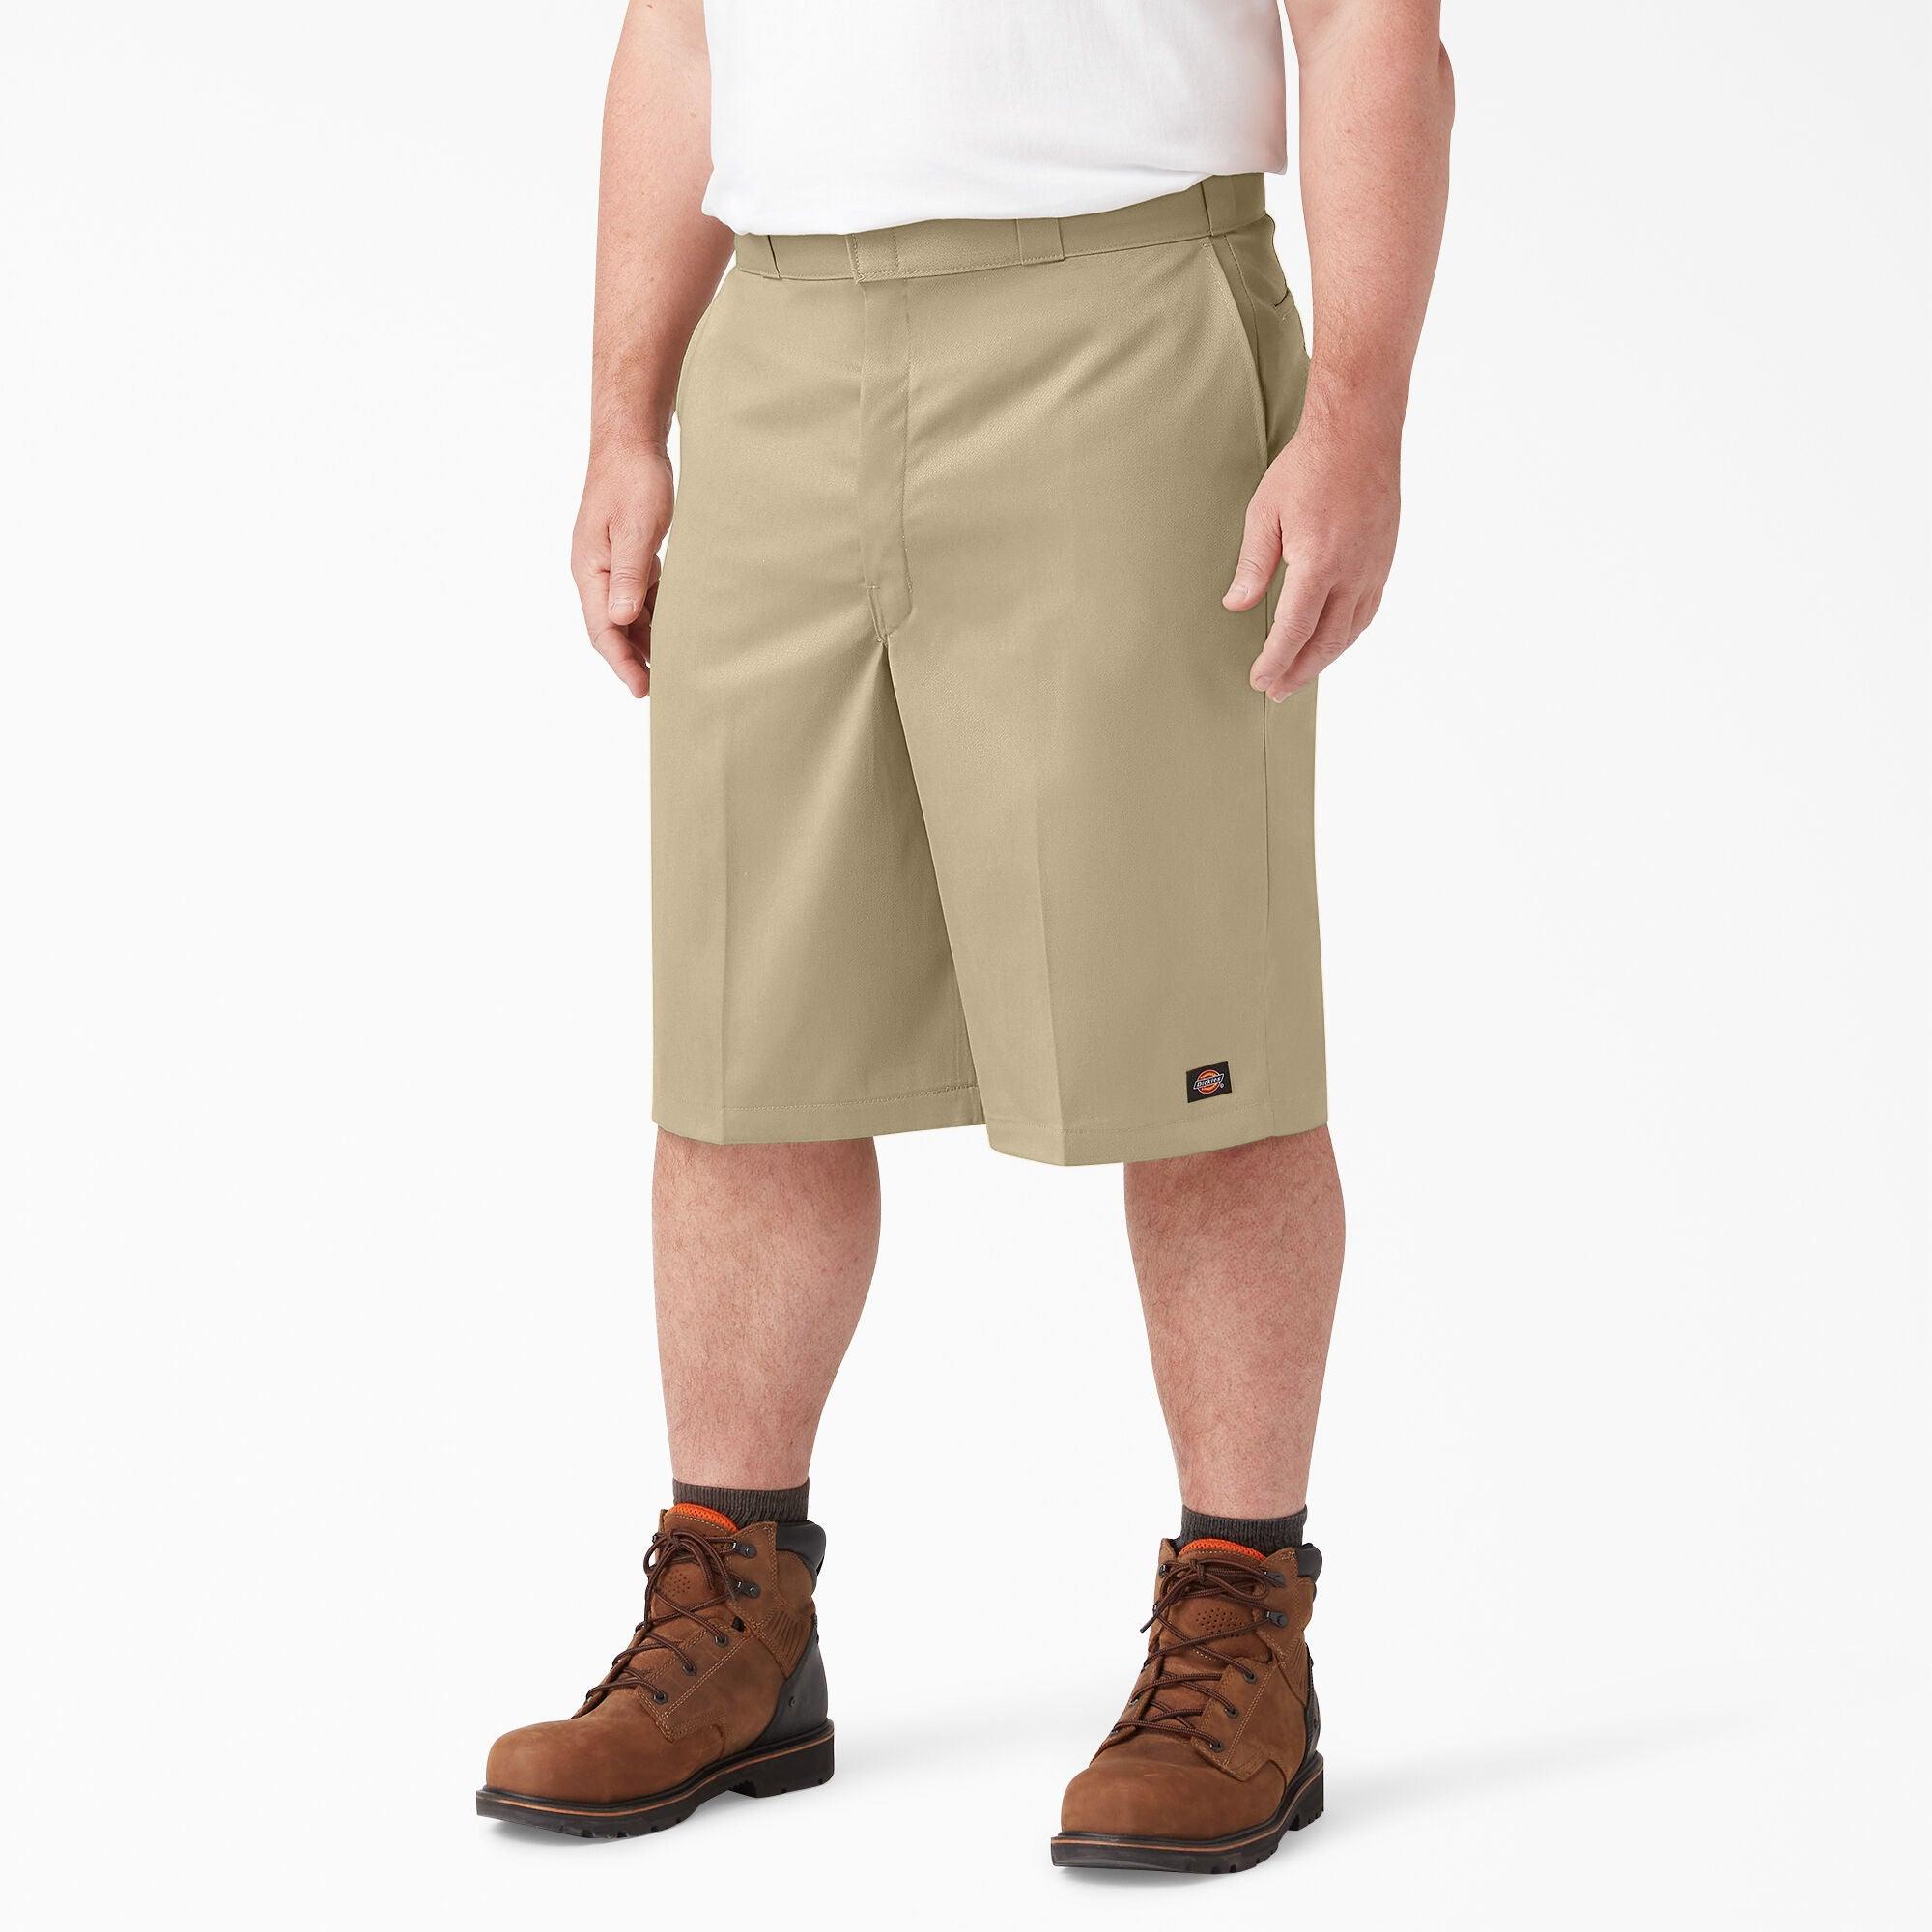 13" Loose Fit Multi-Use Pocket Work Shorts - Khaki - Purpose-Built / Home of the Trades